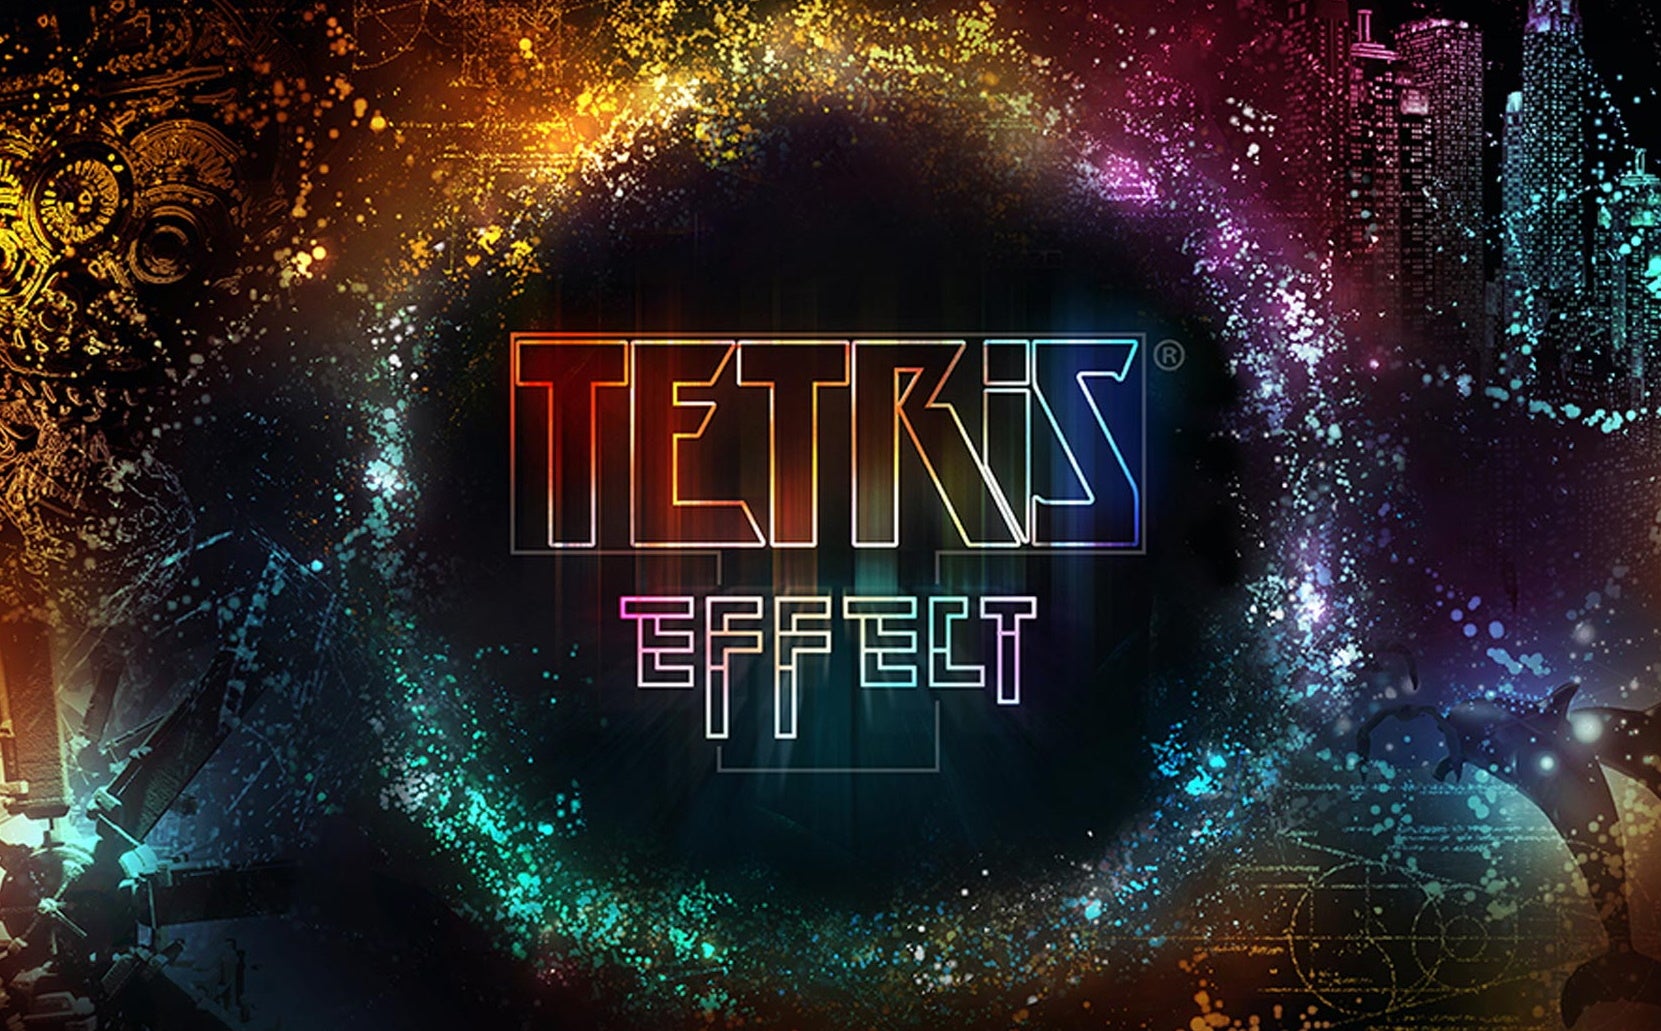 Image for Epic Store exclusive Tetris Effect requires SteamVR to run in VR [Update]